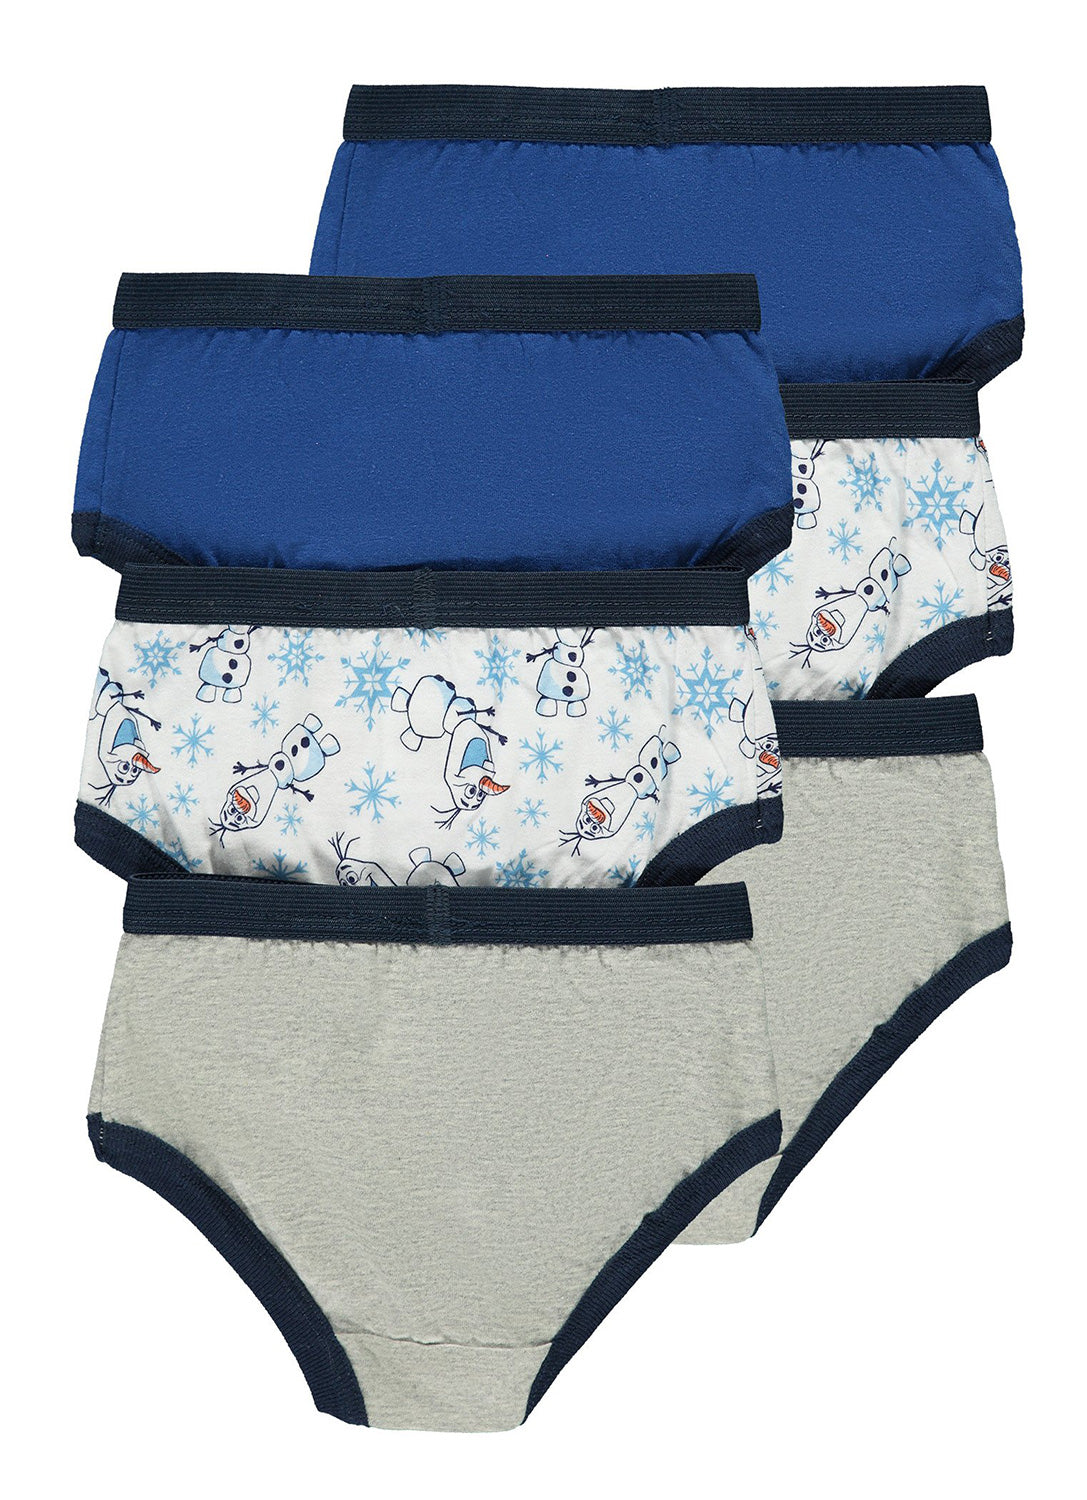 6 Back Underwear fro Boys with Frozen 2 prints